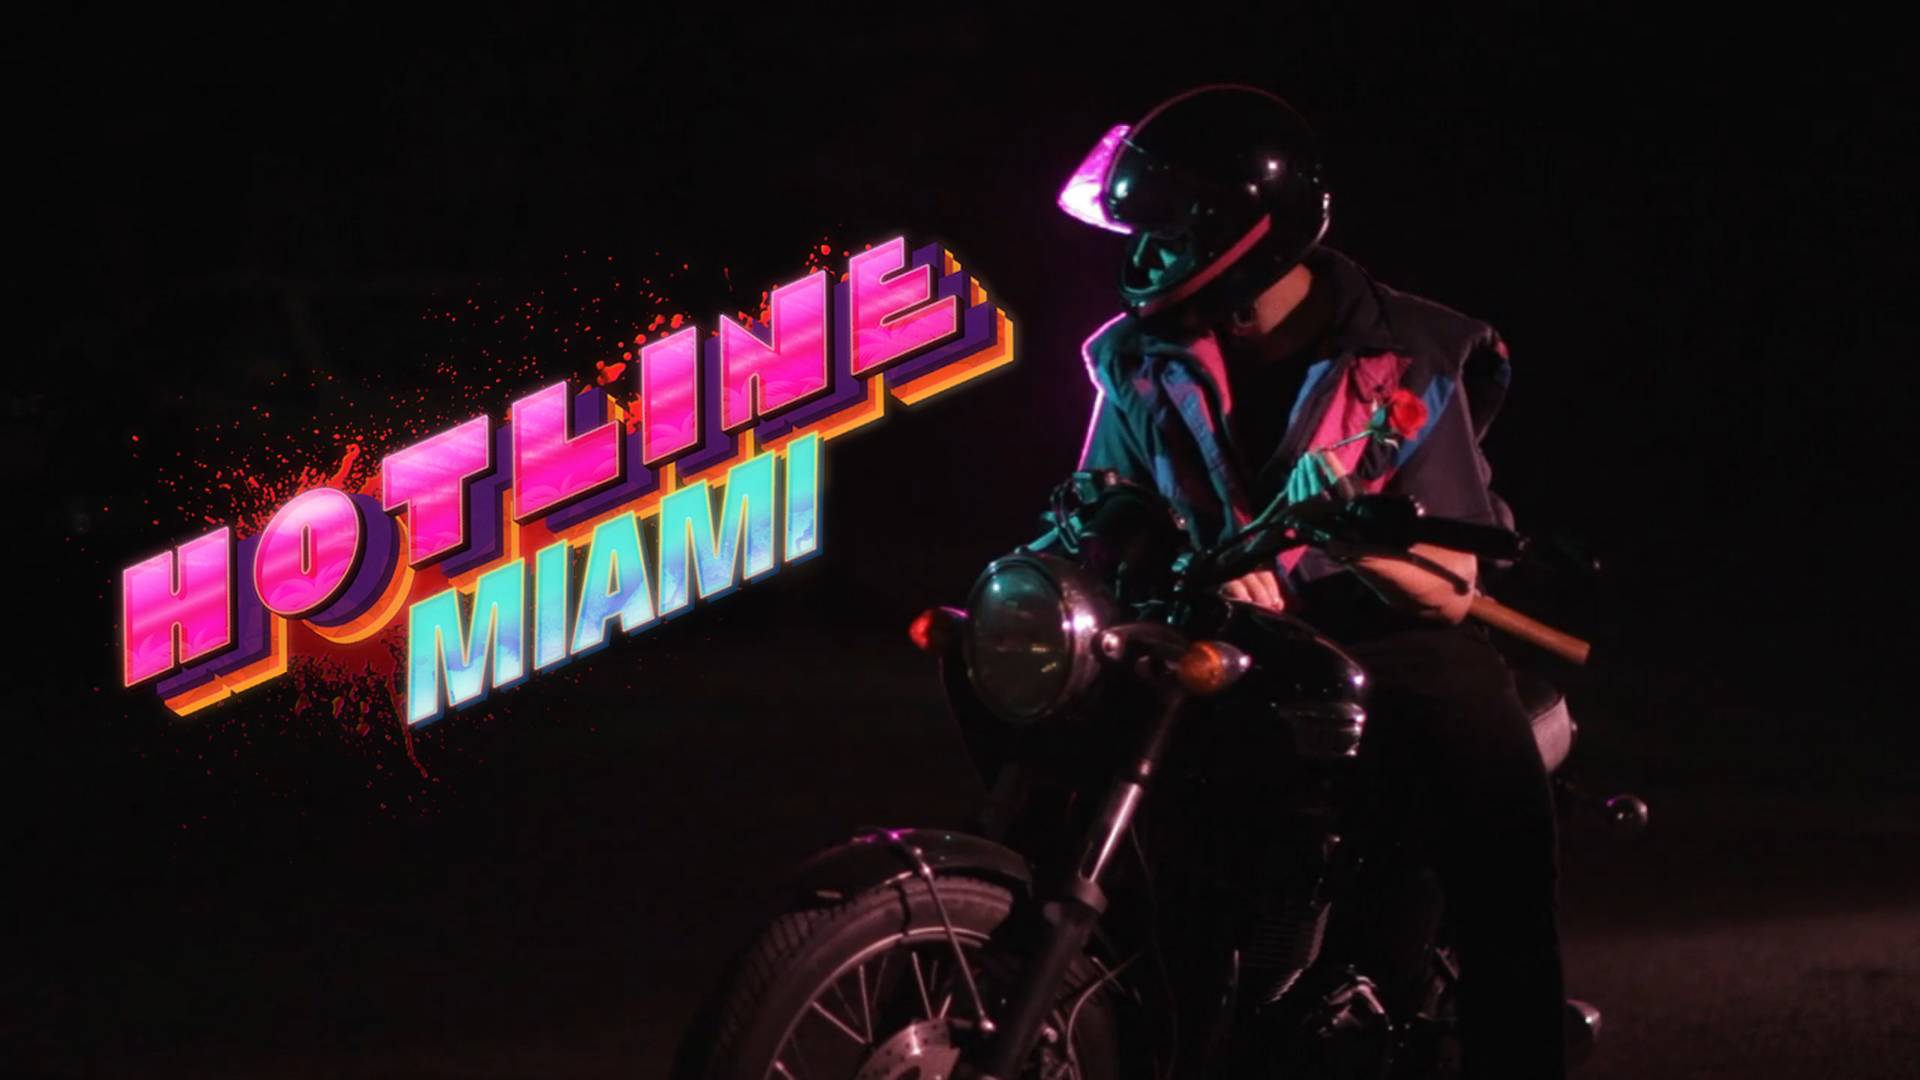 Bring out your inner vigilante in Hotline Miami now on Android